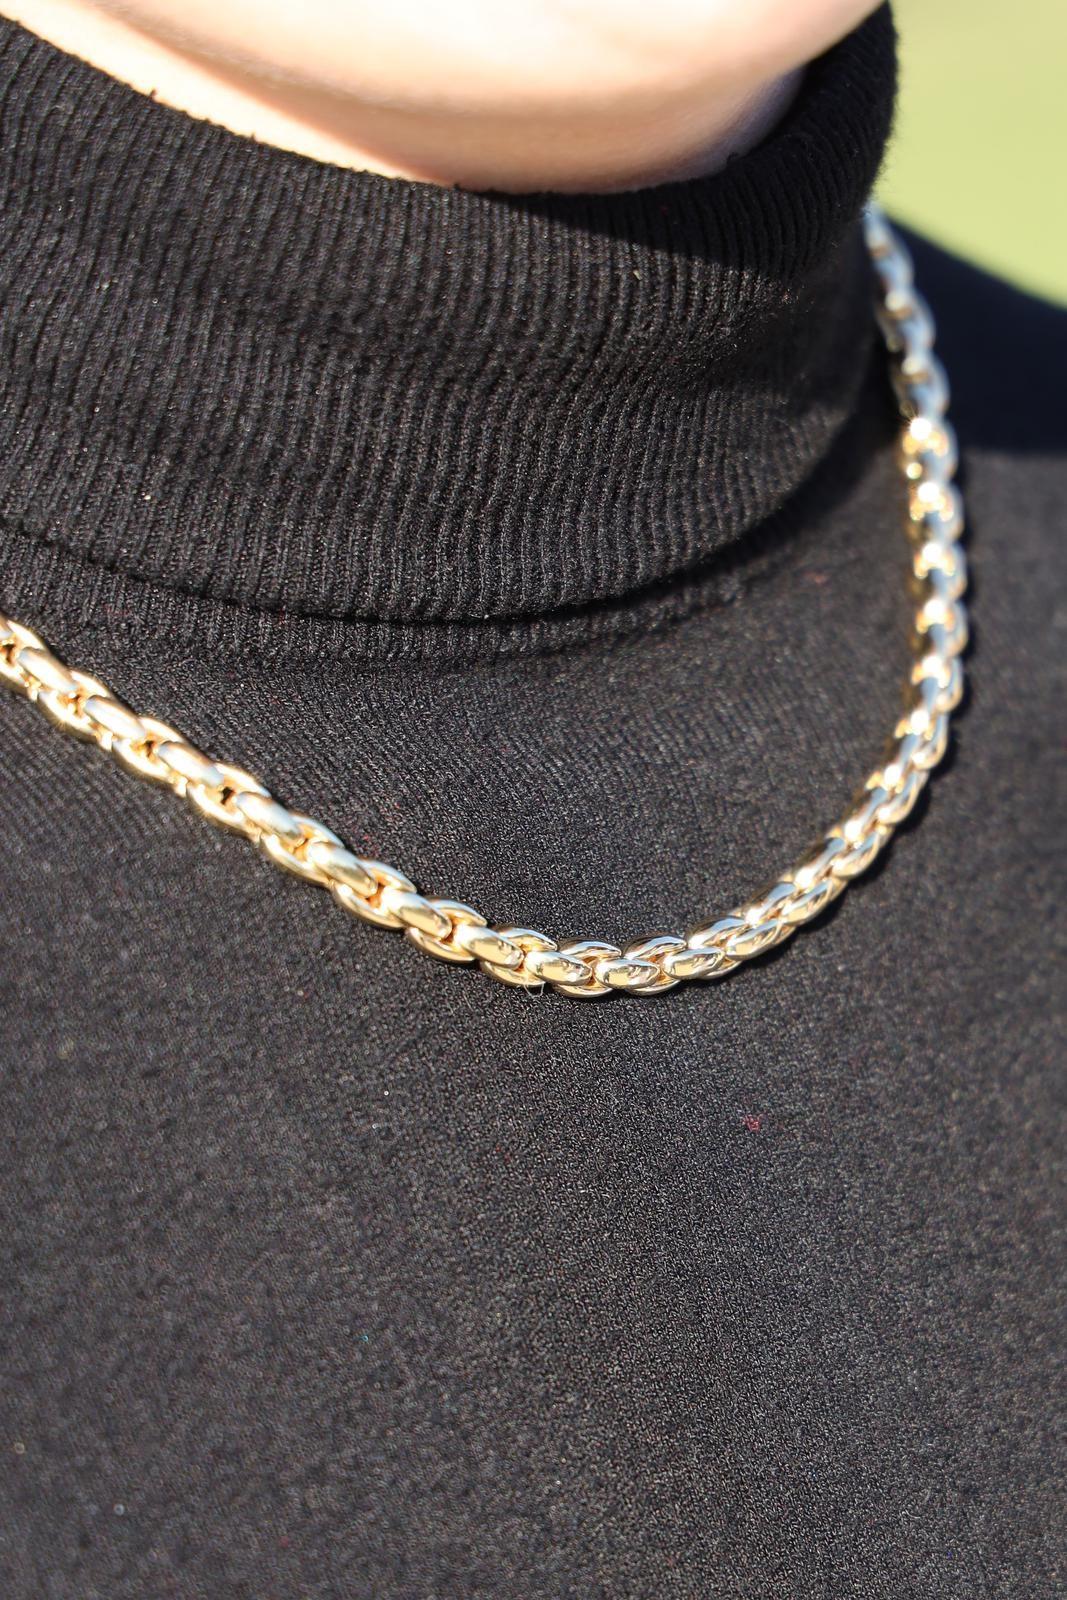 Chain in yellow gold 750 thousandths (18 carats). length: 46 cm. width: 0.6 cm. total weight: 41.75 g. eagle head hallmark. excellent condition